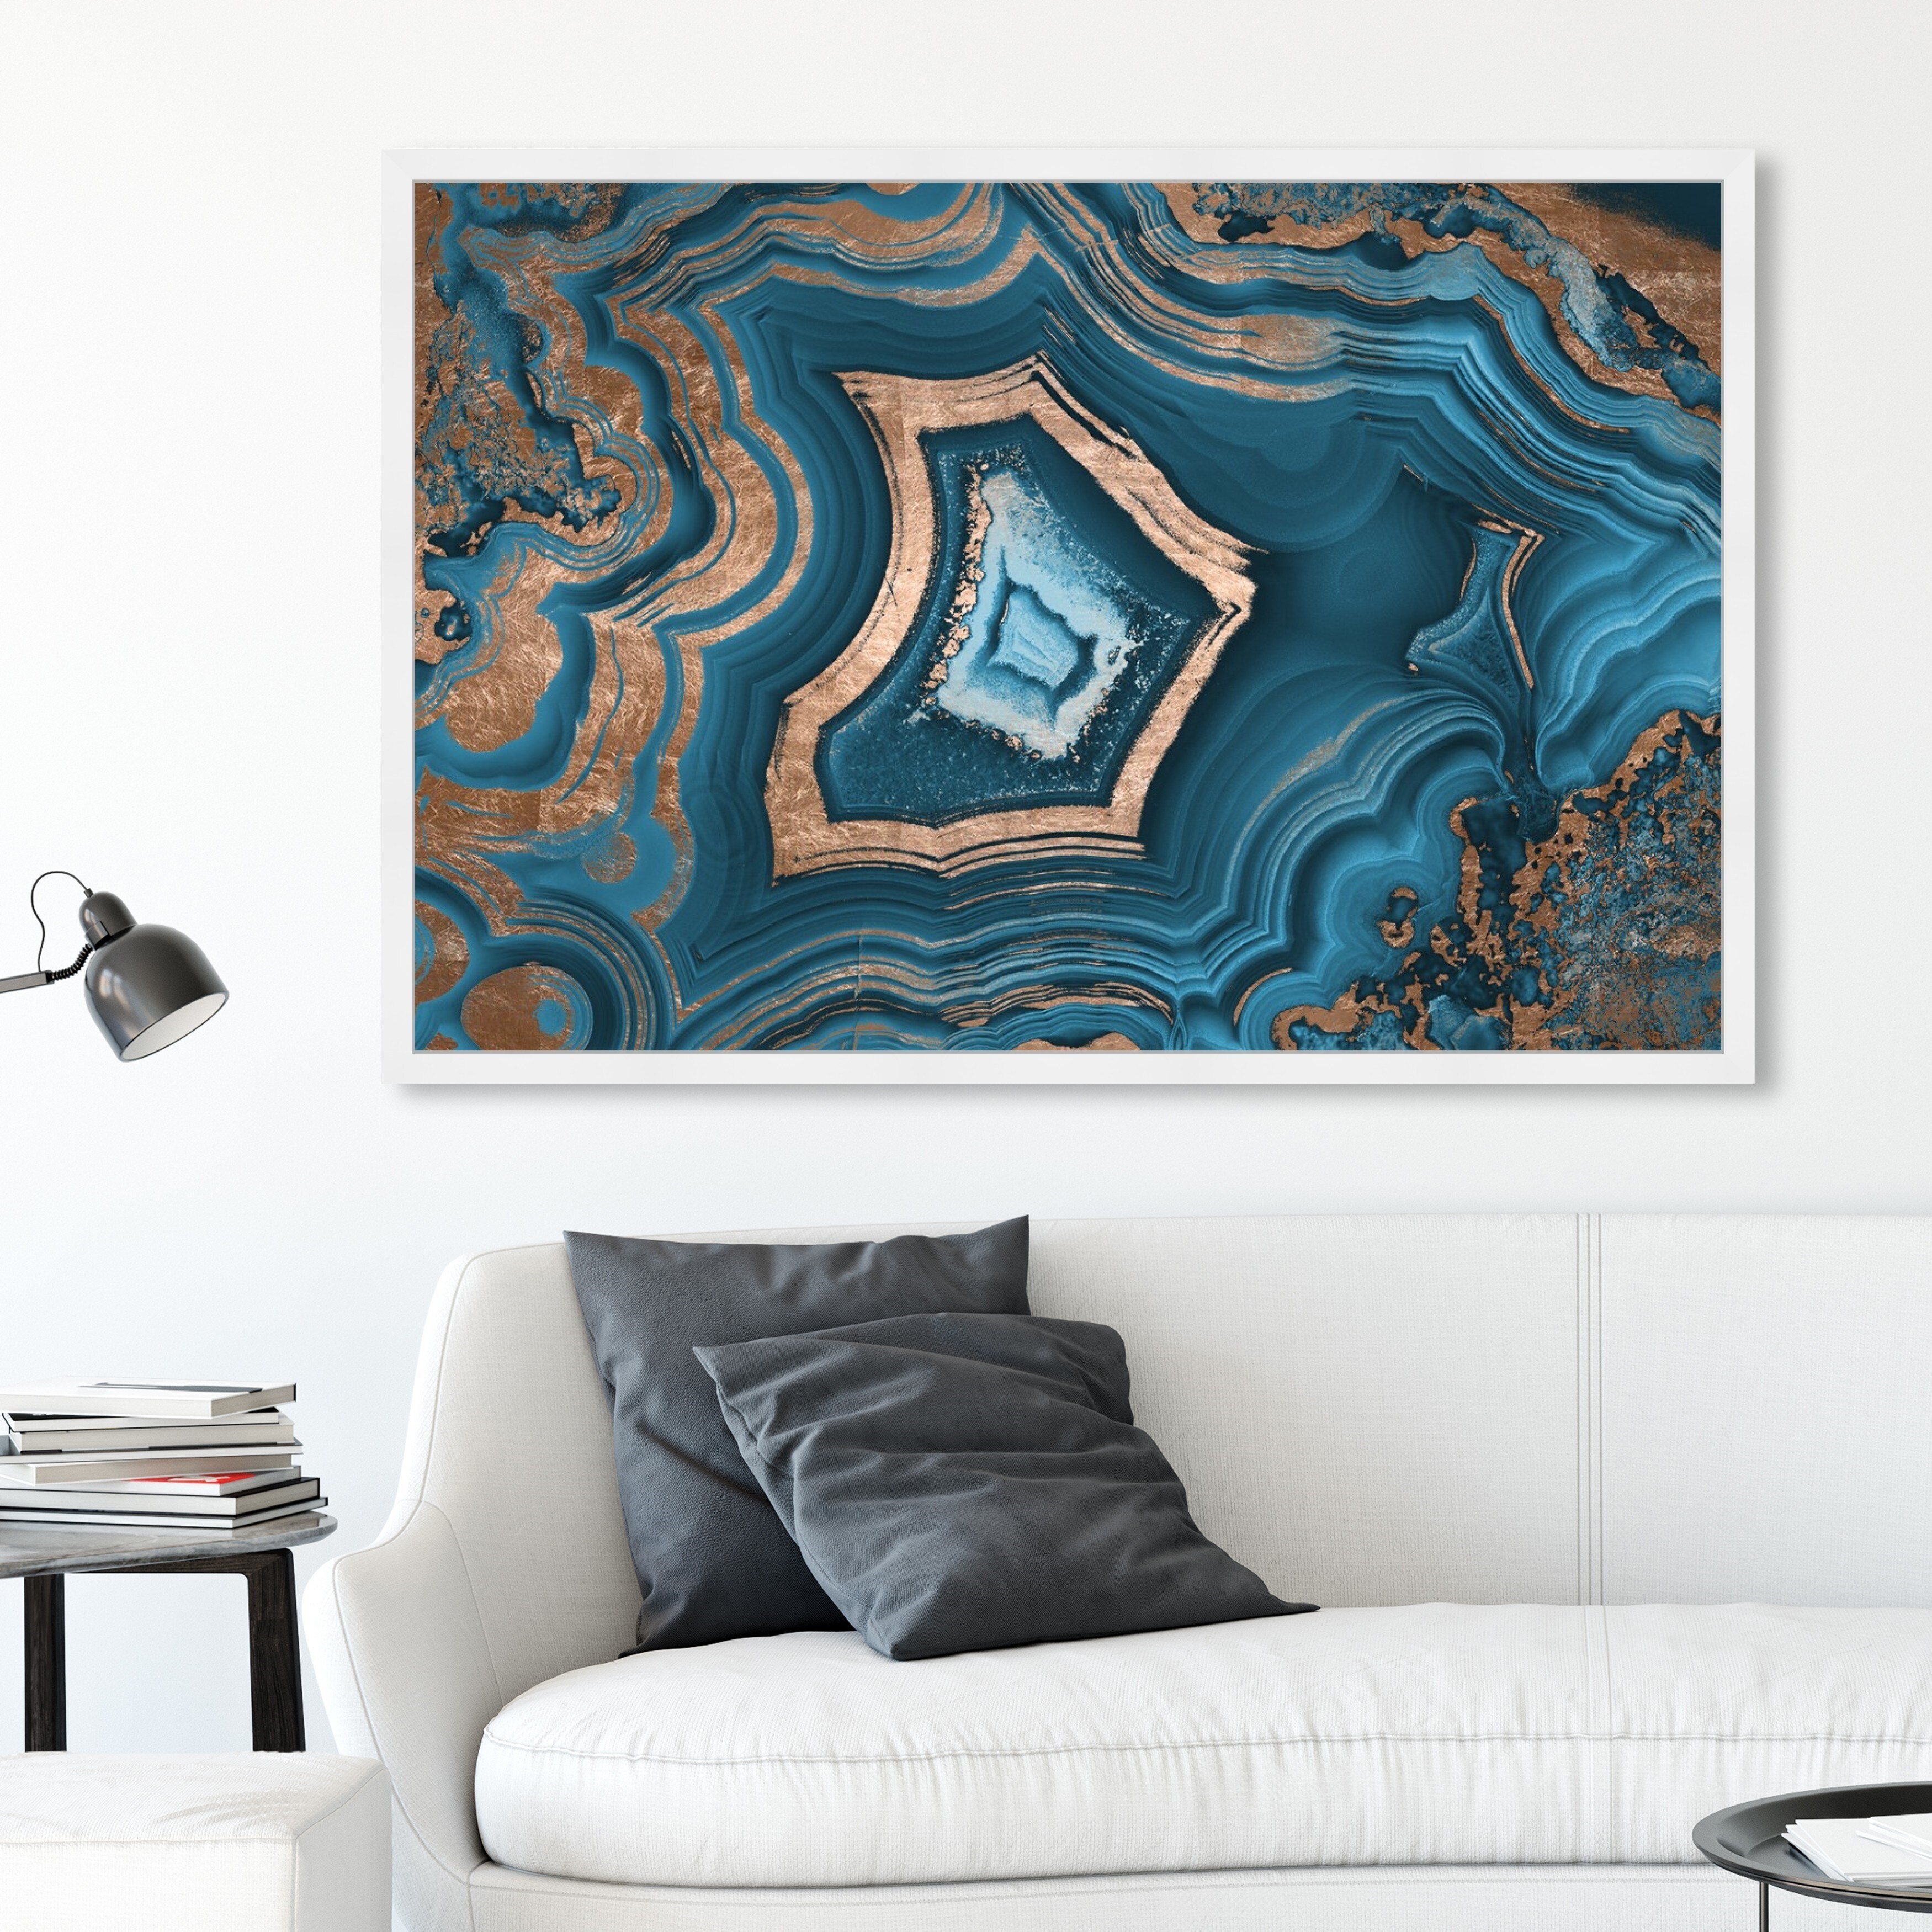 Oliver Gal 'Dreaming About You Geode' Abstract Framed Wall Art Prints Crystals - Blue, Bronze